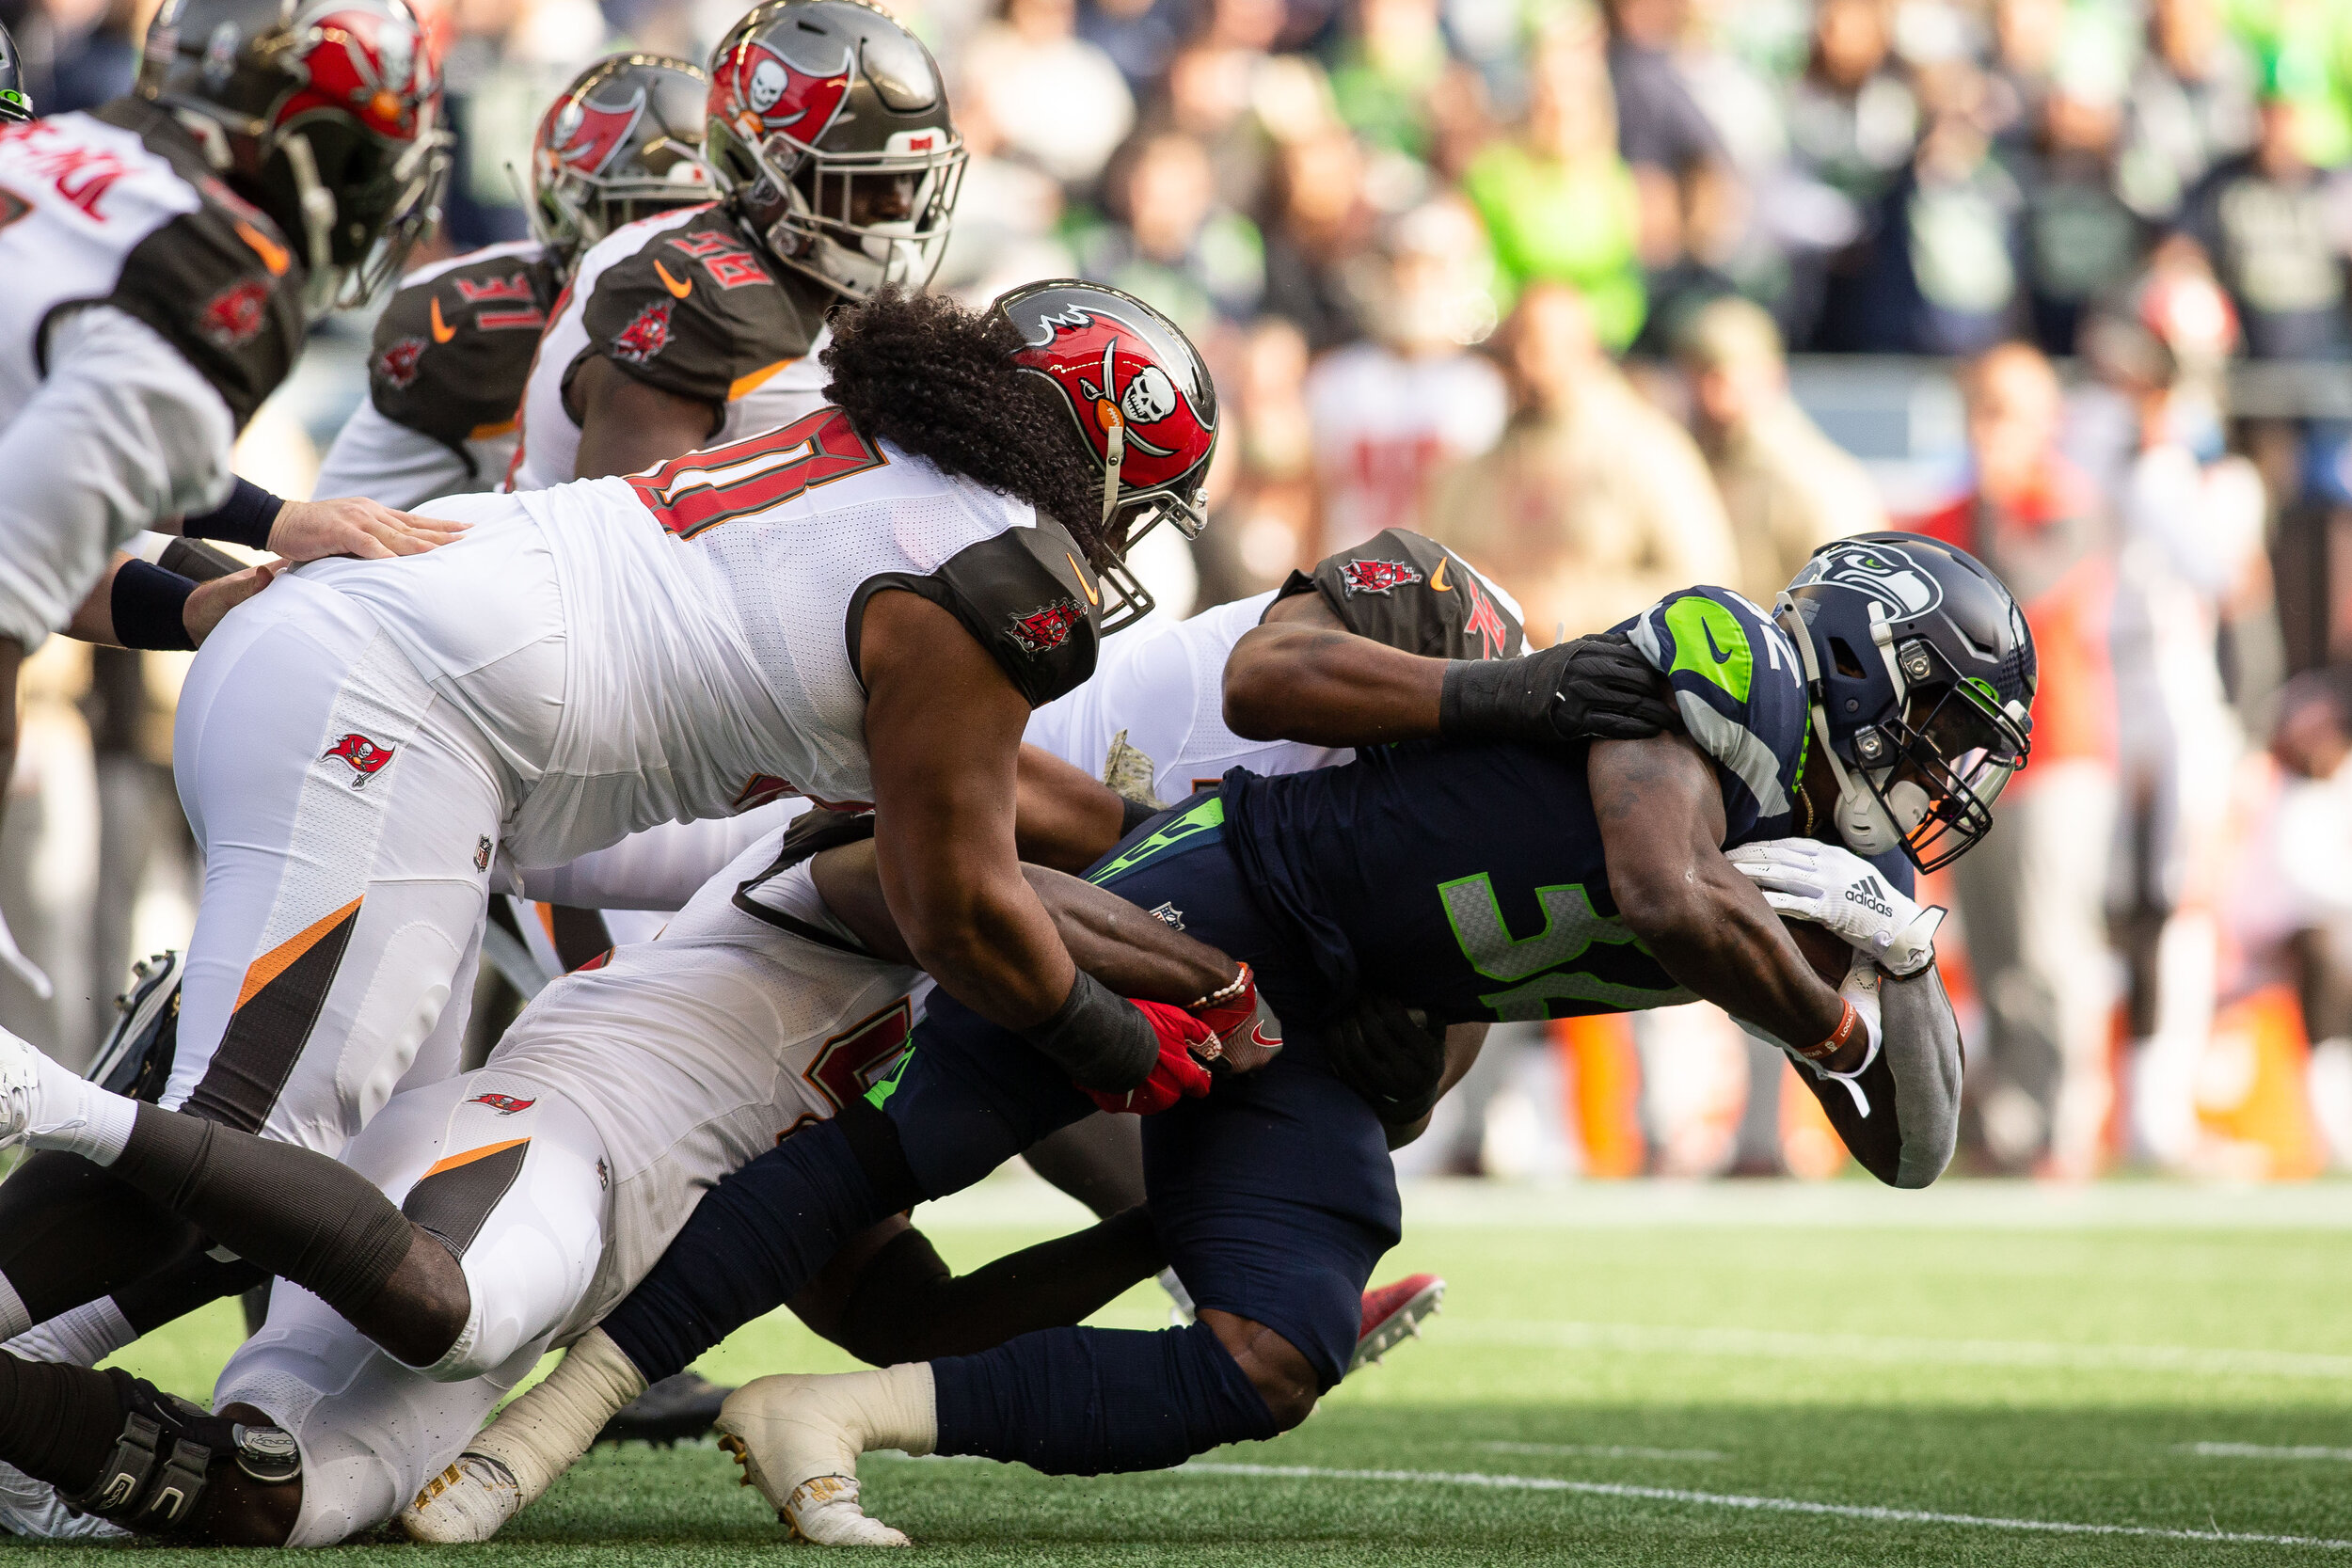  Seattle Seahawks running back Chris Carson (32) drives for extra yards during the first quarter of an NFL football game against the Tampa Bay Buccaneers, Sunday, Nov. 3, 2019, in Seattle. Seattle defeated Tampa Bay 40-34 in overtime. (Matt Ferris/Im